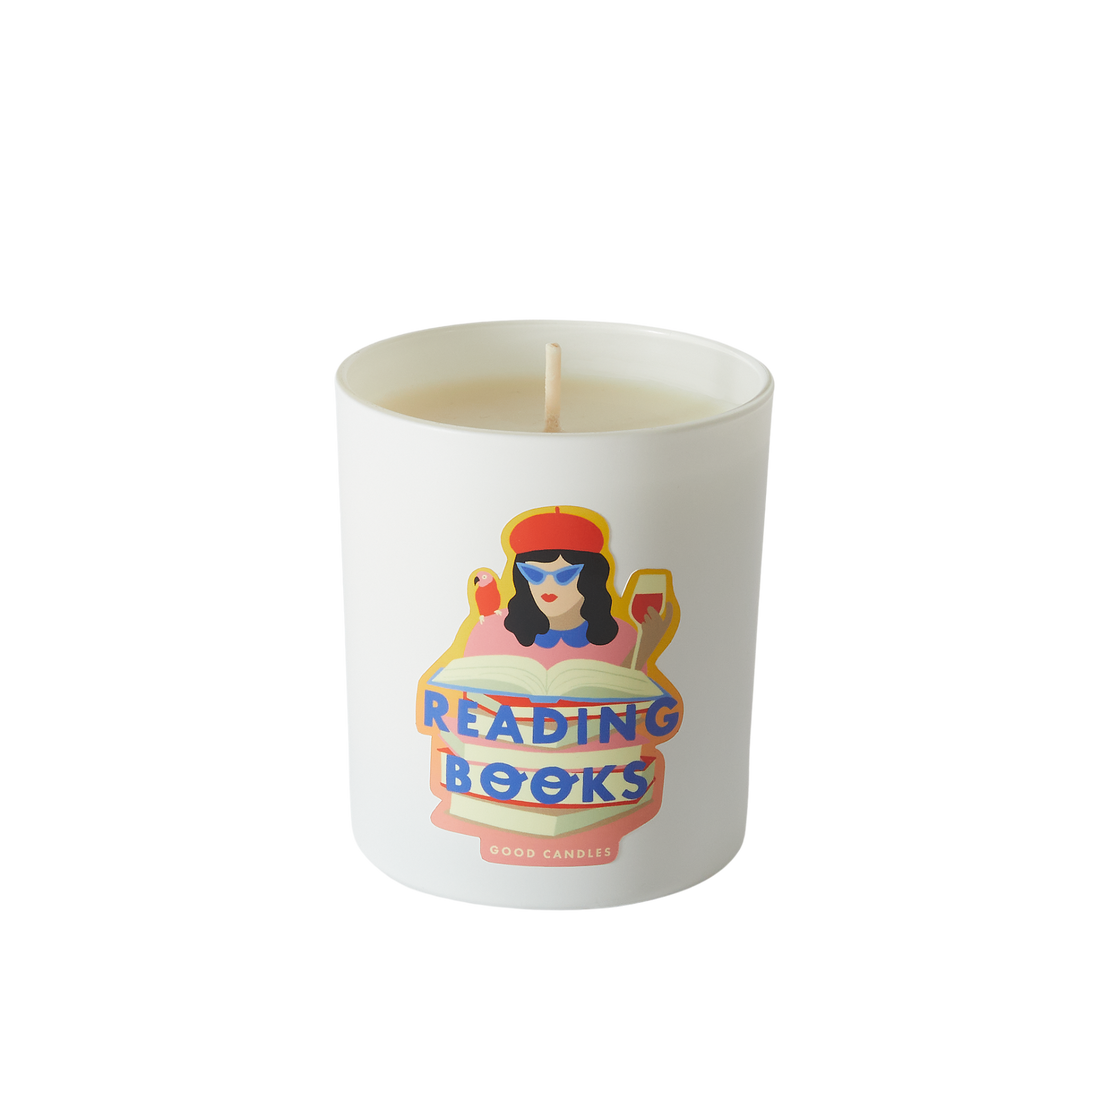 Candles - Reading Books Soy Wax Scented Candle